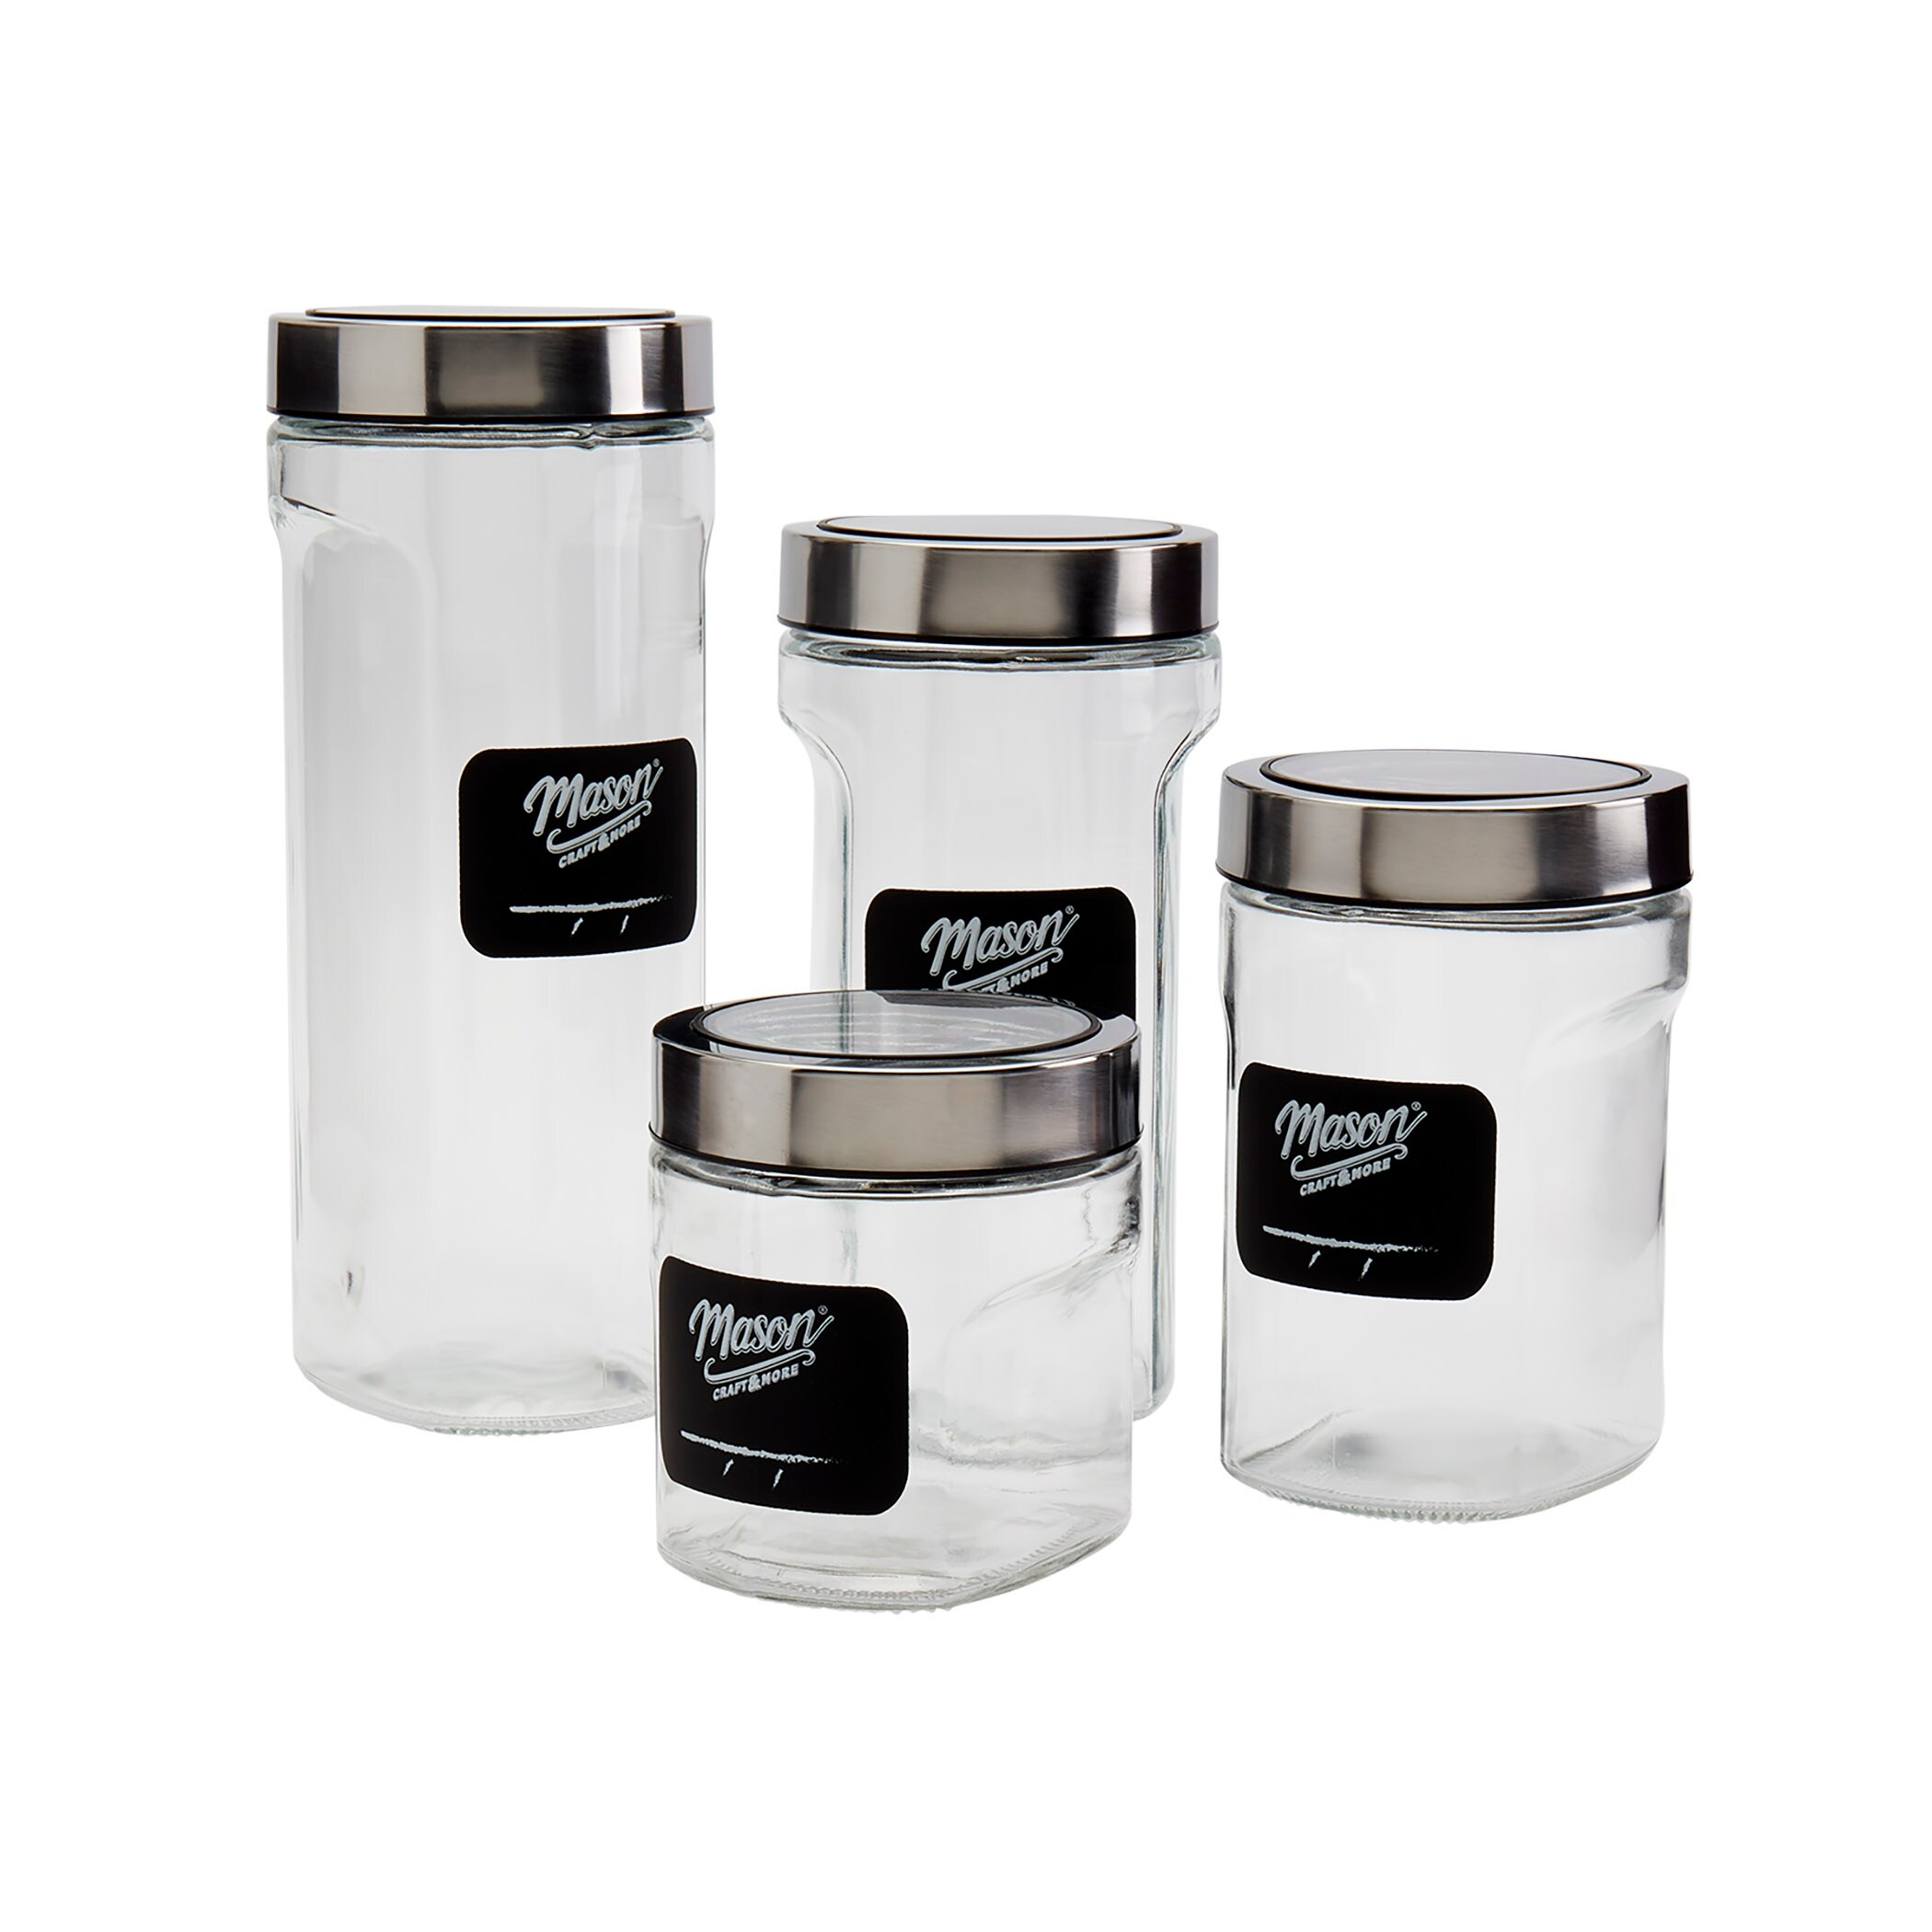 3258-Glass Jar with Bamboo Wood Cover, Small 4.25 H x